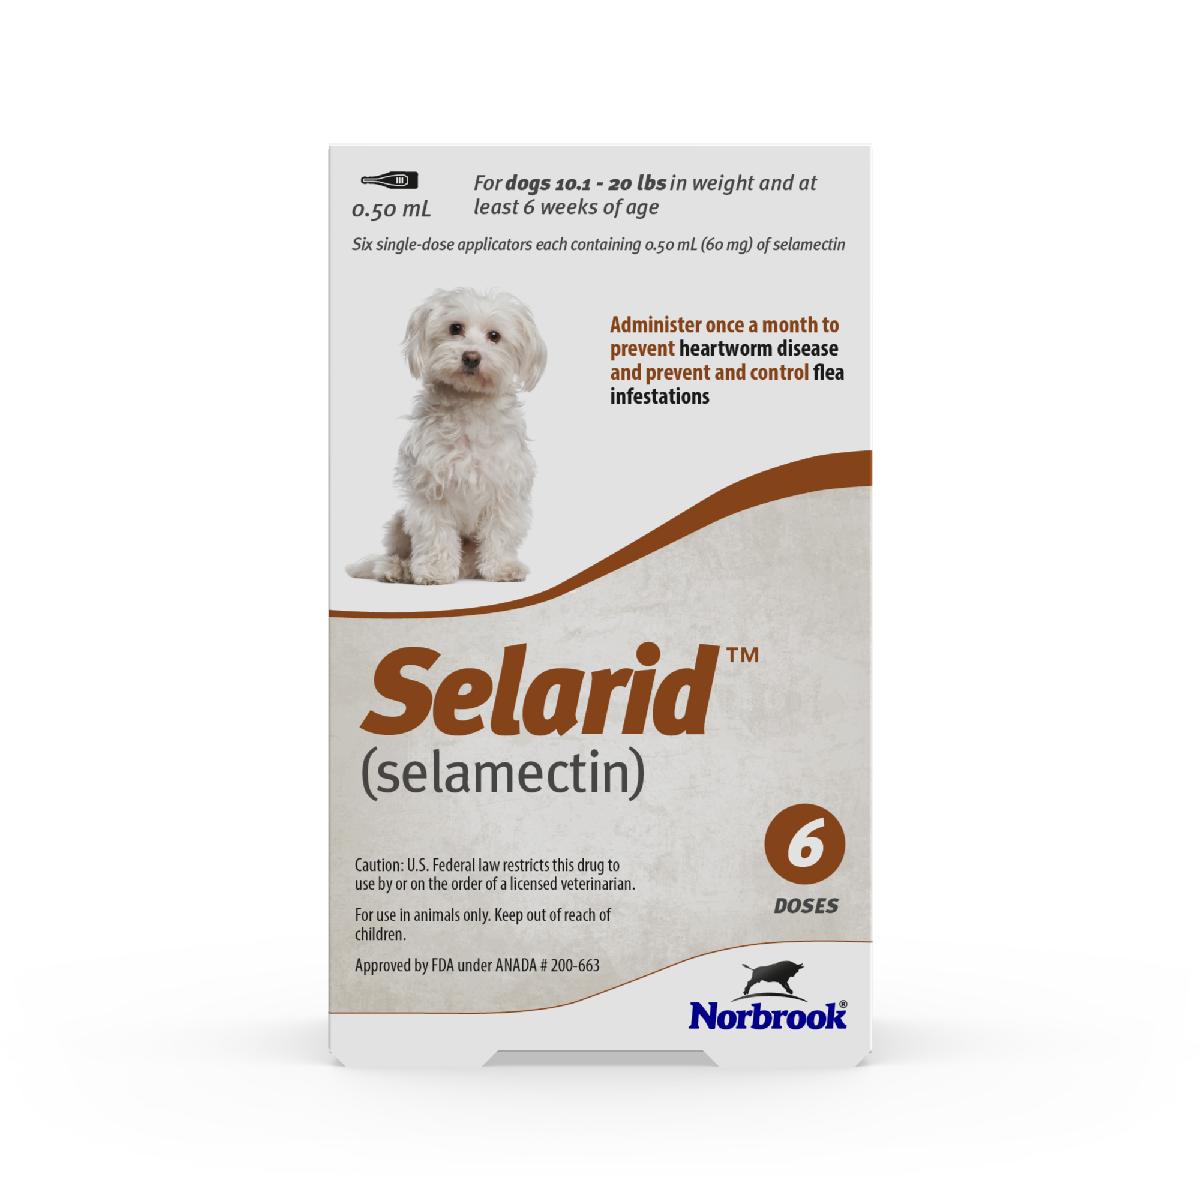 Selarid (selamectin) Topical Parasiticide for Dogs 10.120 lbs, 6 count